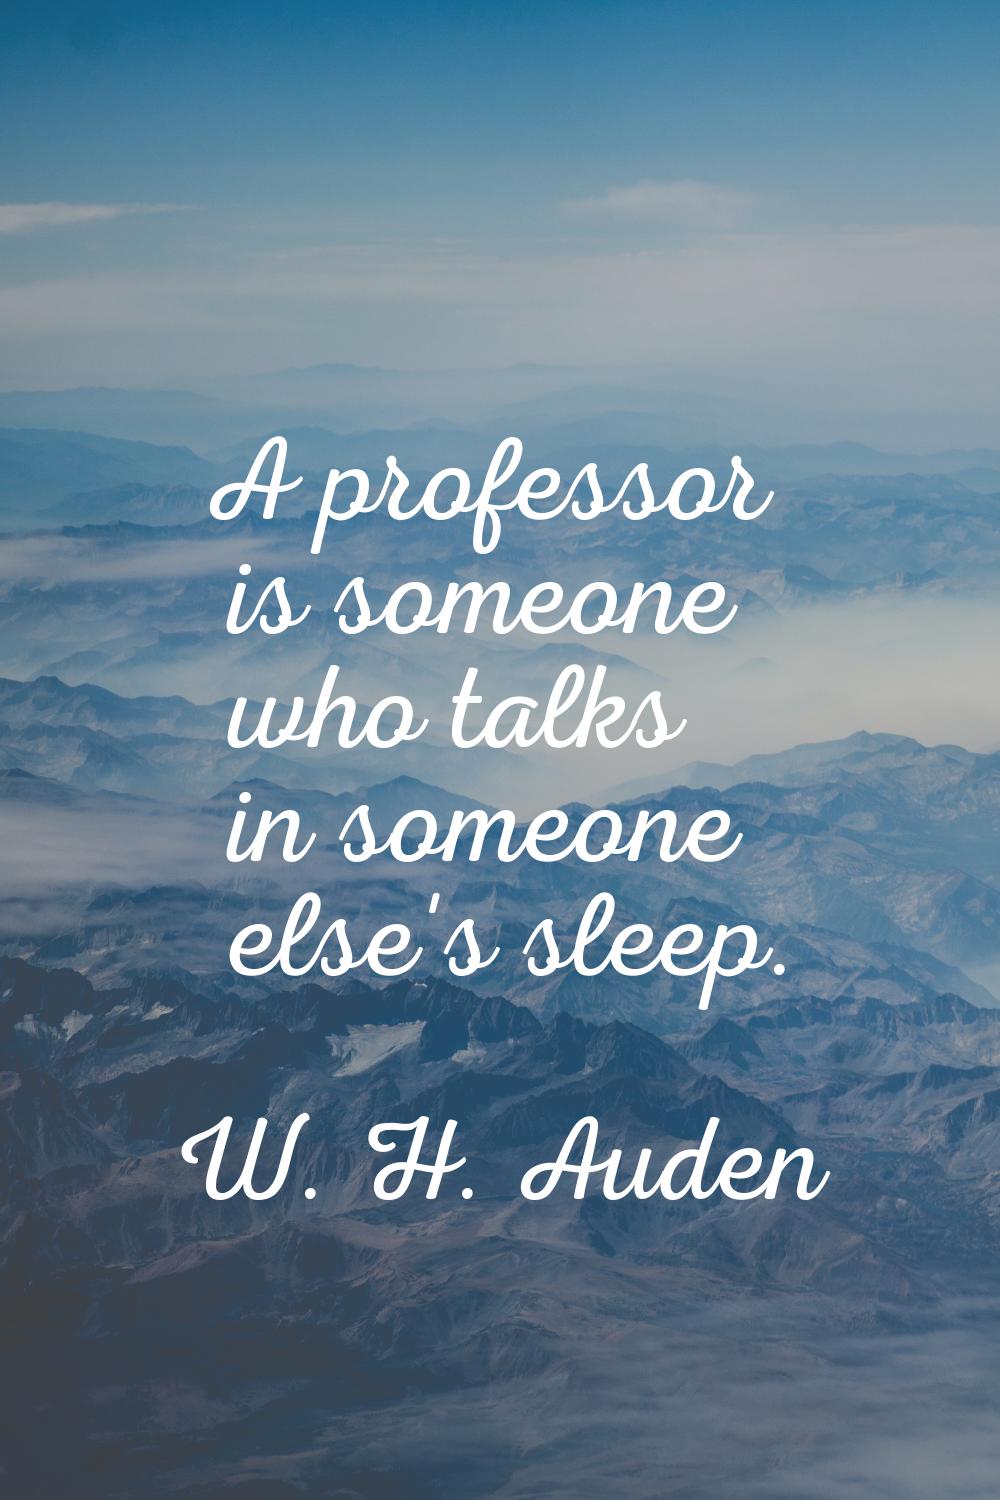 A professor is someone who talks in someone else's sleep.